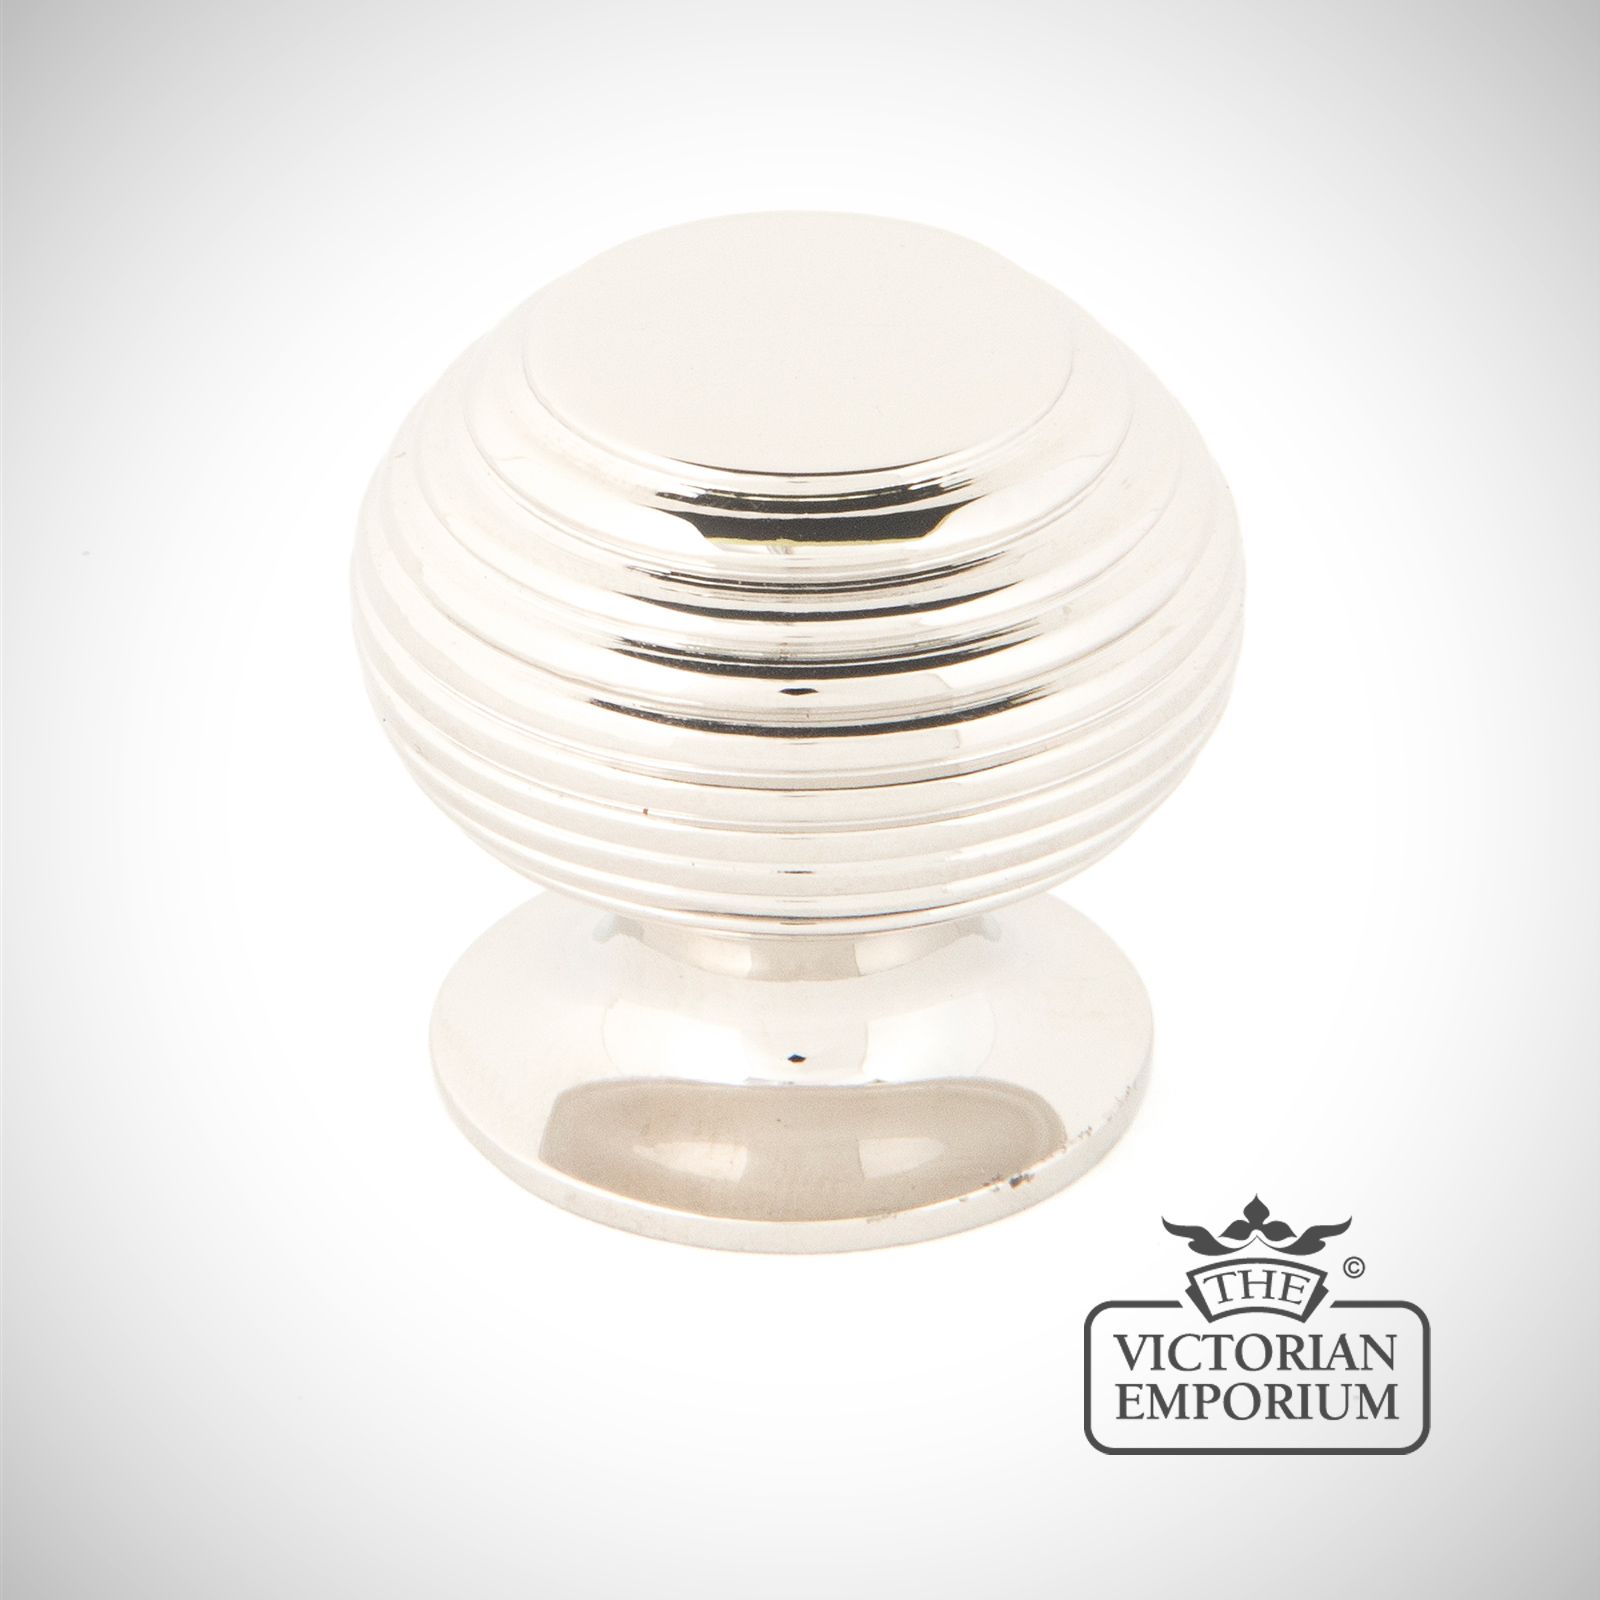 Polished Nickel Beehive Cabinet Knob in a choice of two sizes